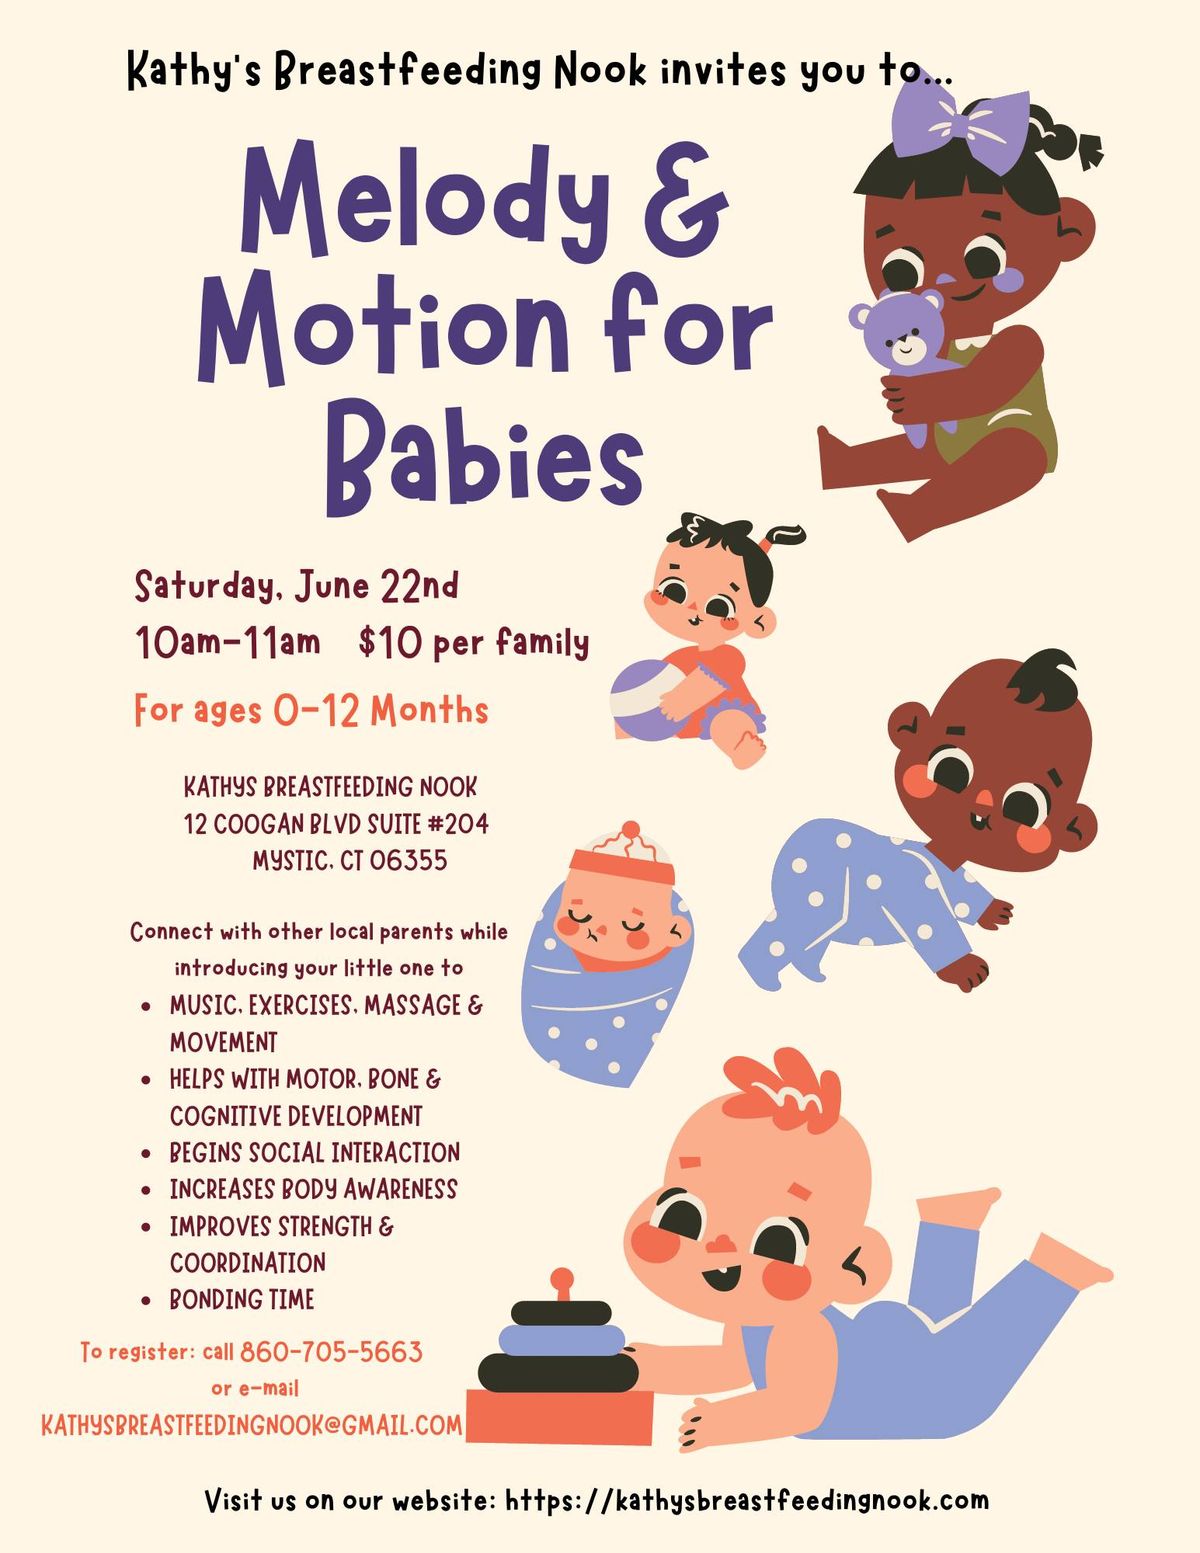 Melody & Motion for Babies